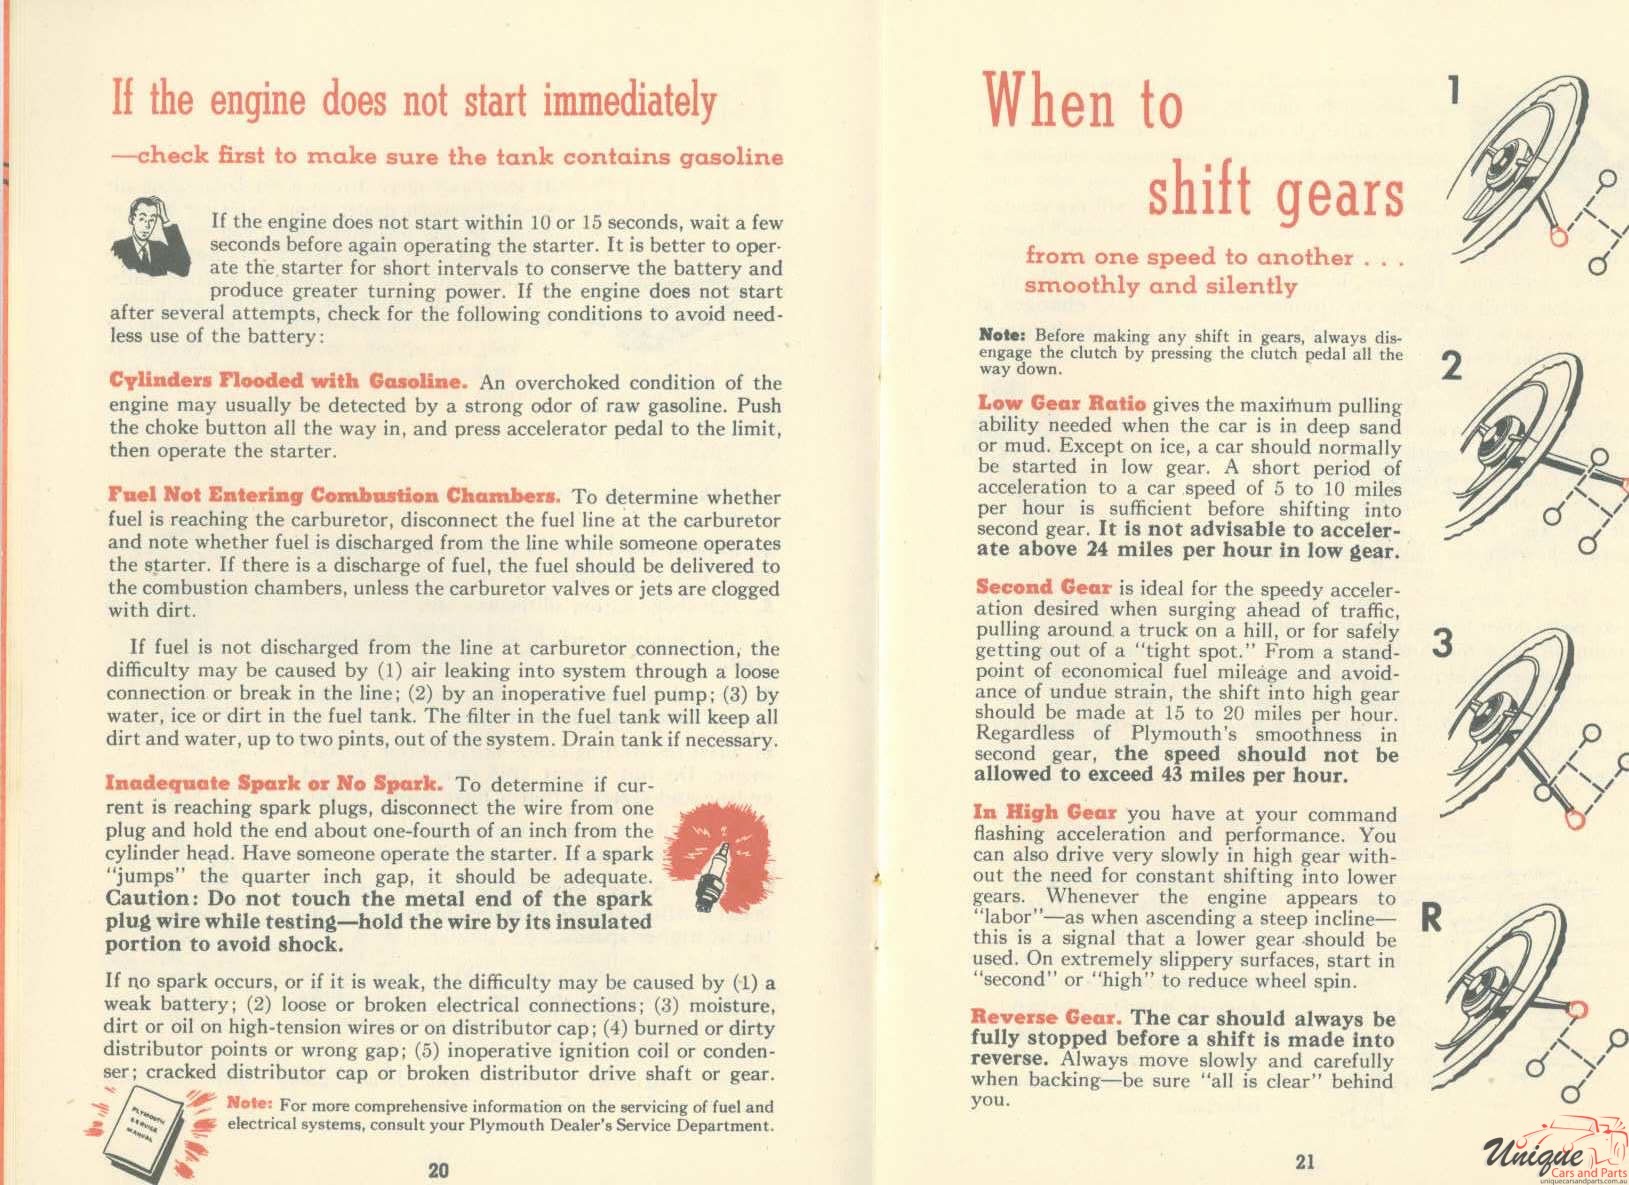 1948 Plymouth Owners Manual Page 23